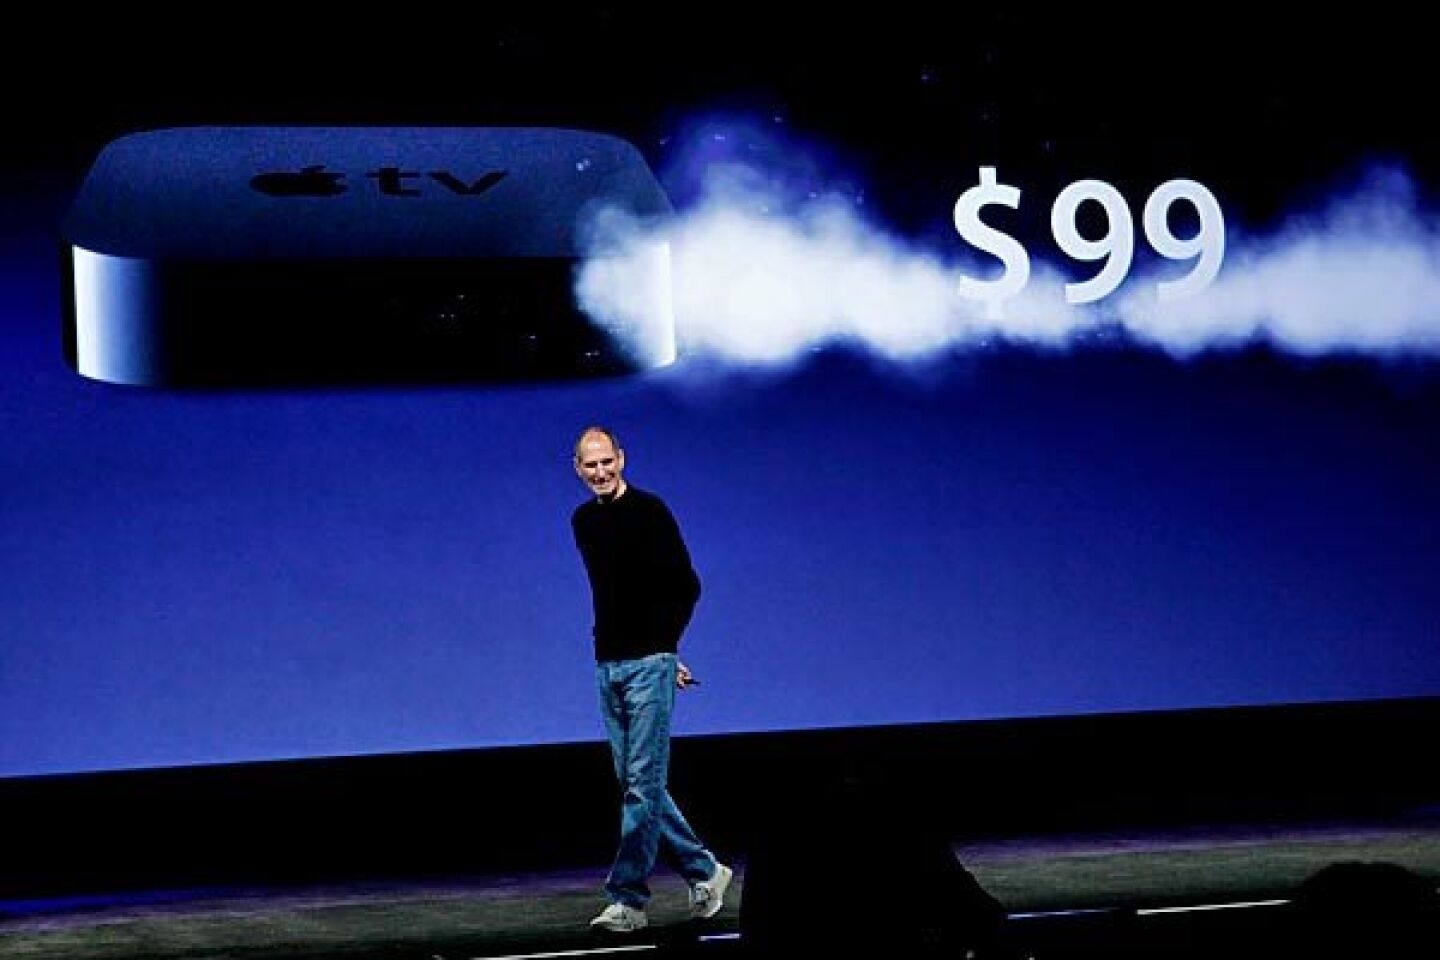 Jobs announces the $99 Apple TV device, with 99-cent online TV show rentals. The majority of Hollywood studios, and two broadcast networks -- CBS and NBC -- declined to allow their shows to be included. "Not all of them wanted to take this step with us," Jobs said. "We think the other studios will see the light."